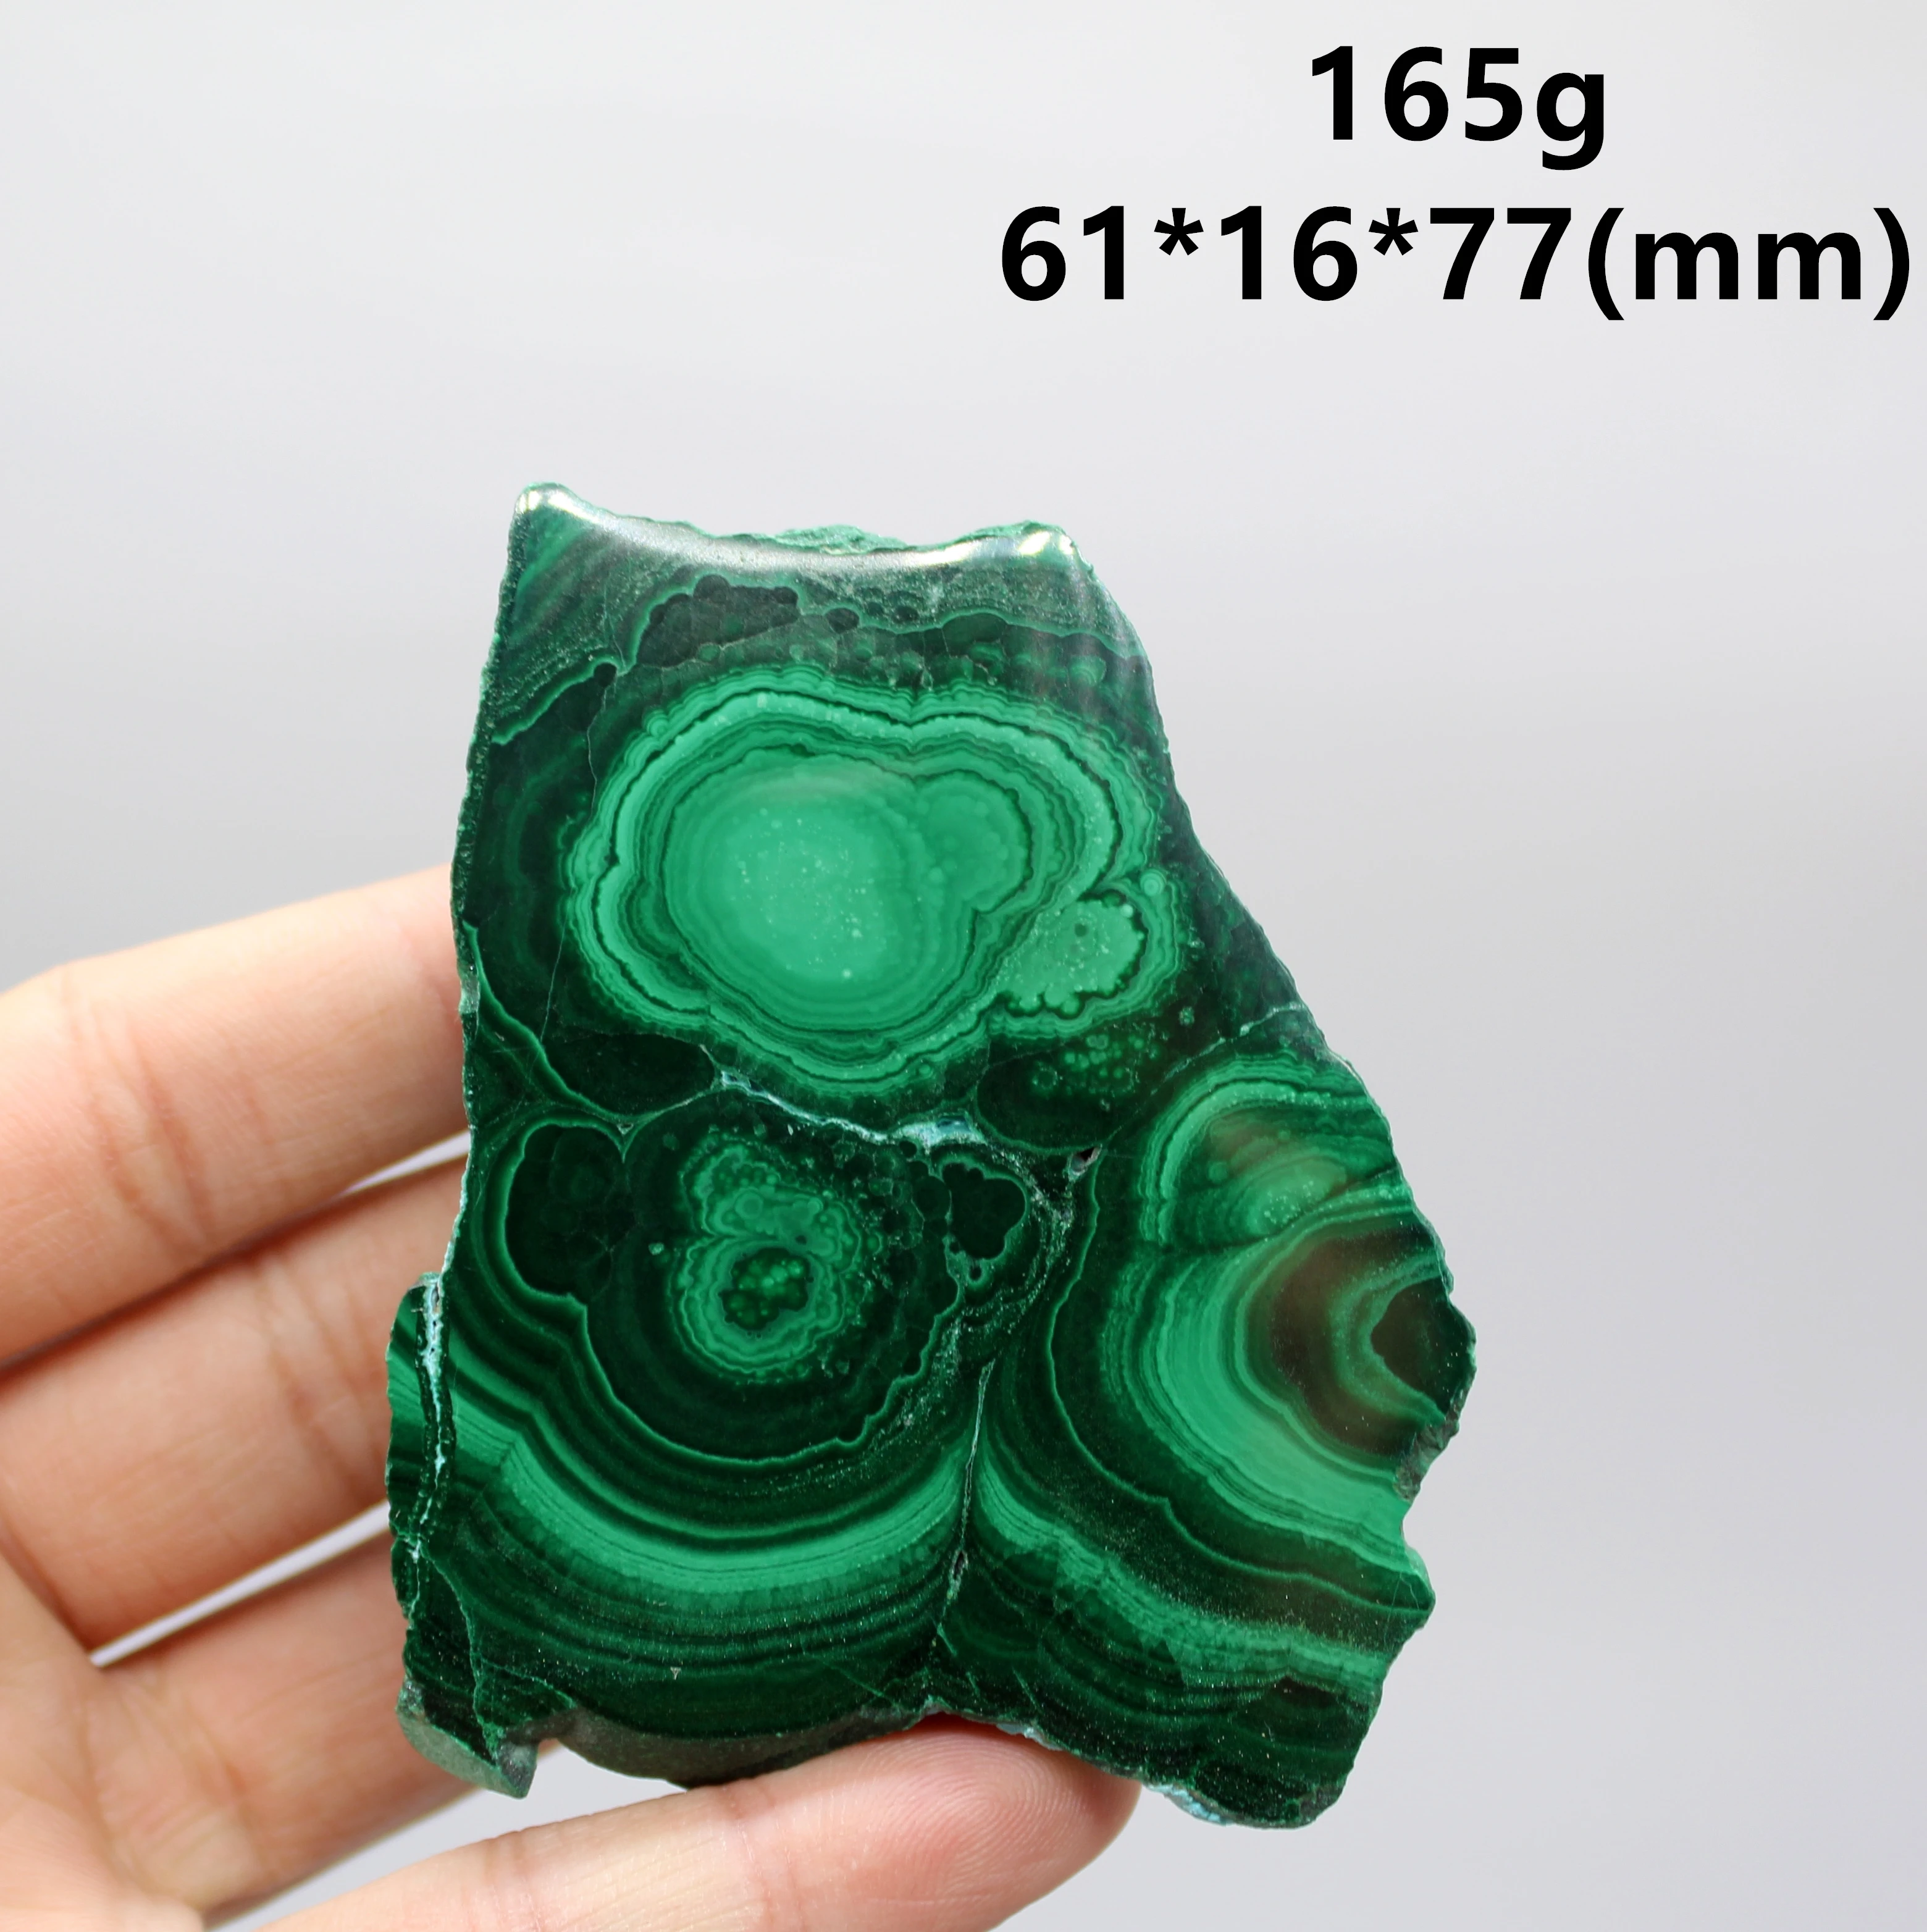 

BEST! 100% Natural green malachite polished mineral specimen slice rough stone quartz Stones and crystals Healing crystal